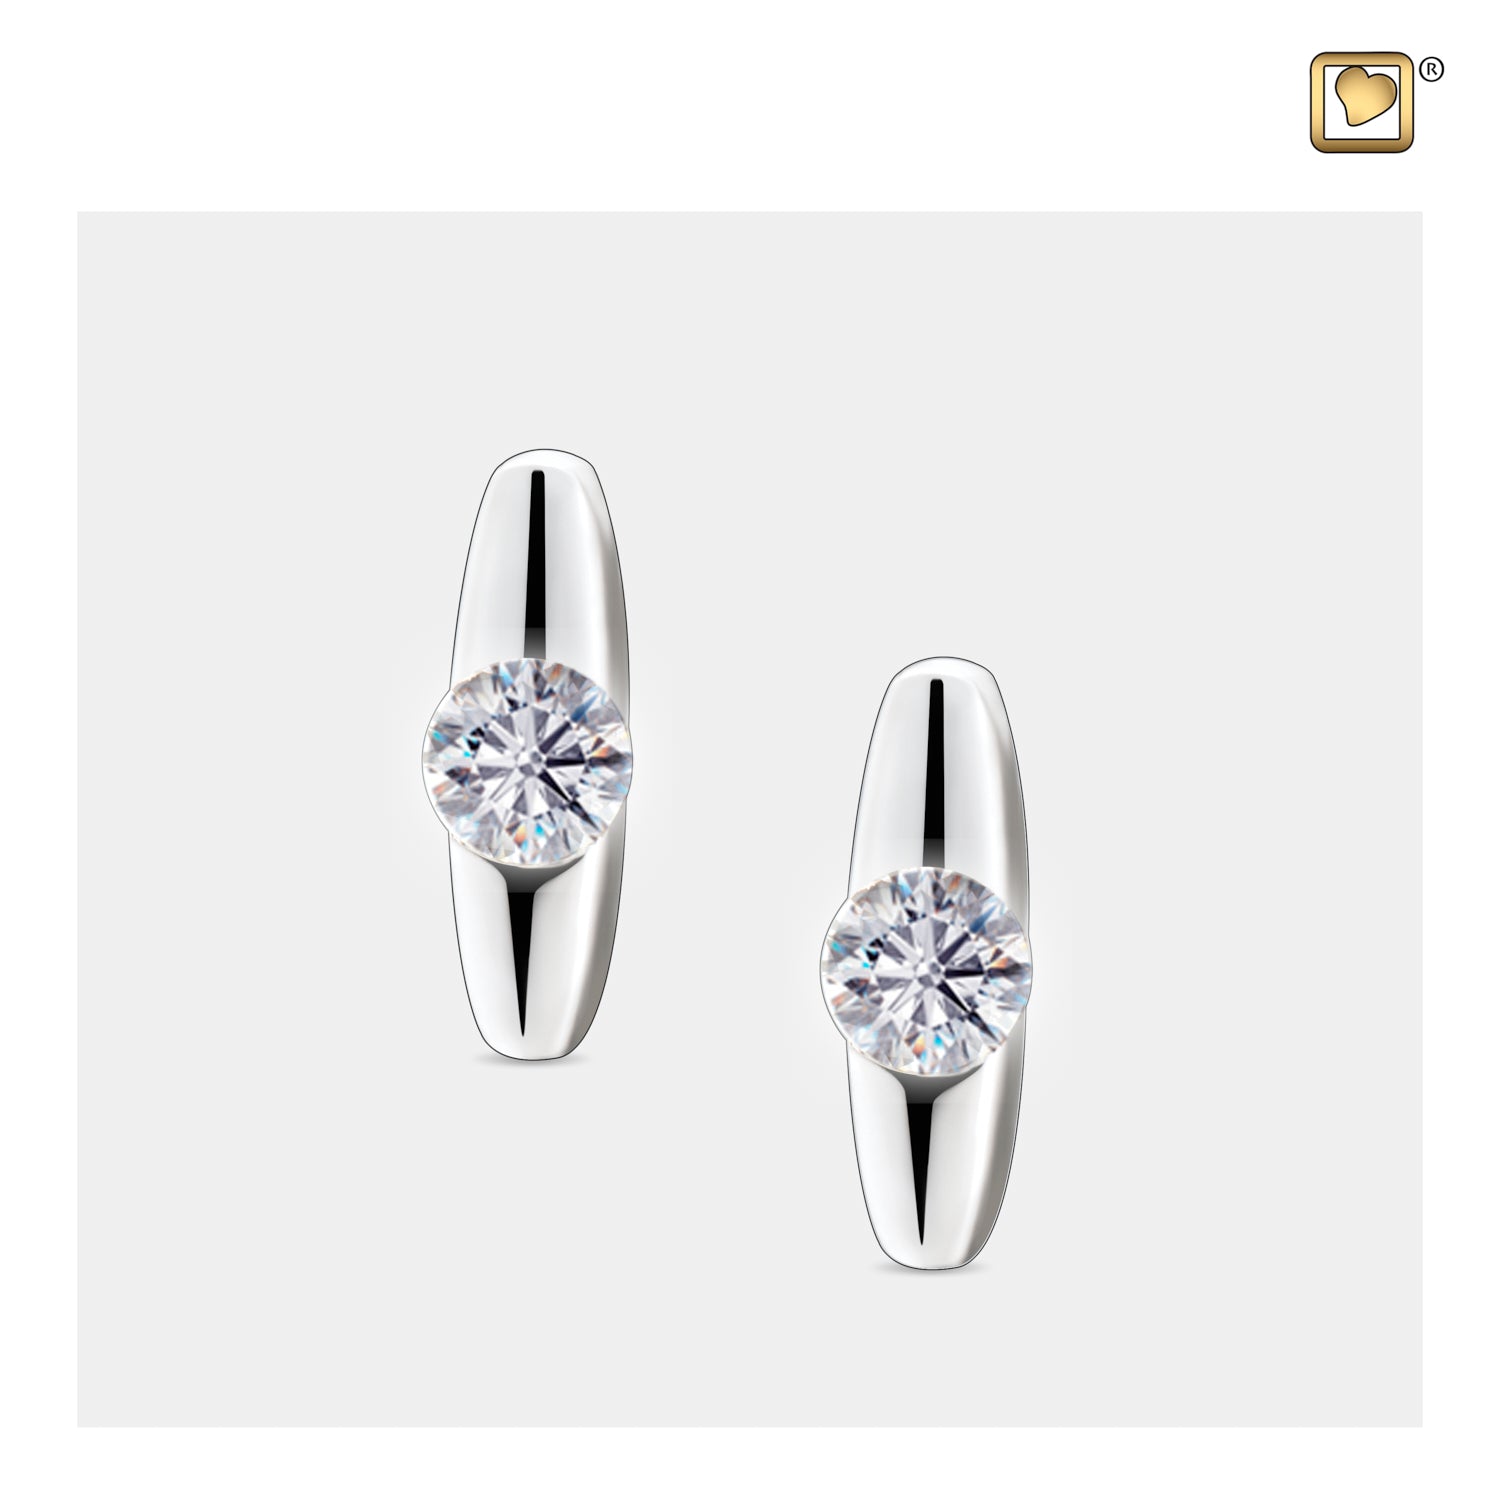 Hopeª Rhodium Plated with Clear Crystal Sterling Silver Stud Earrings